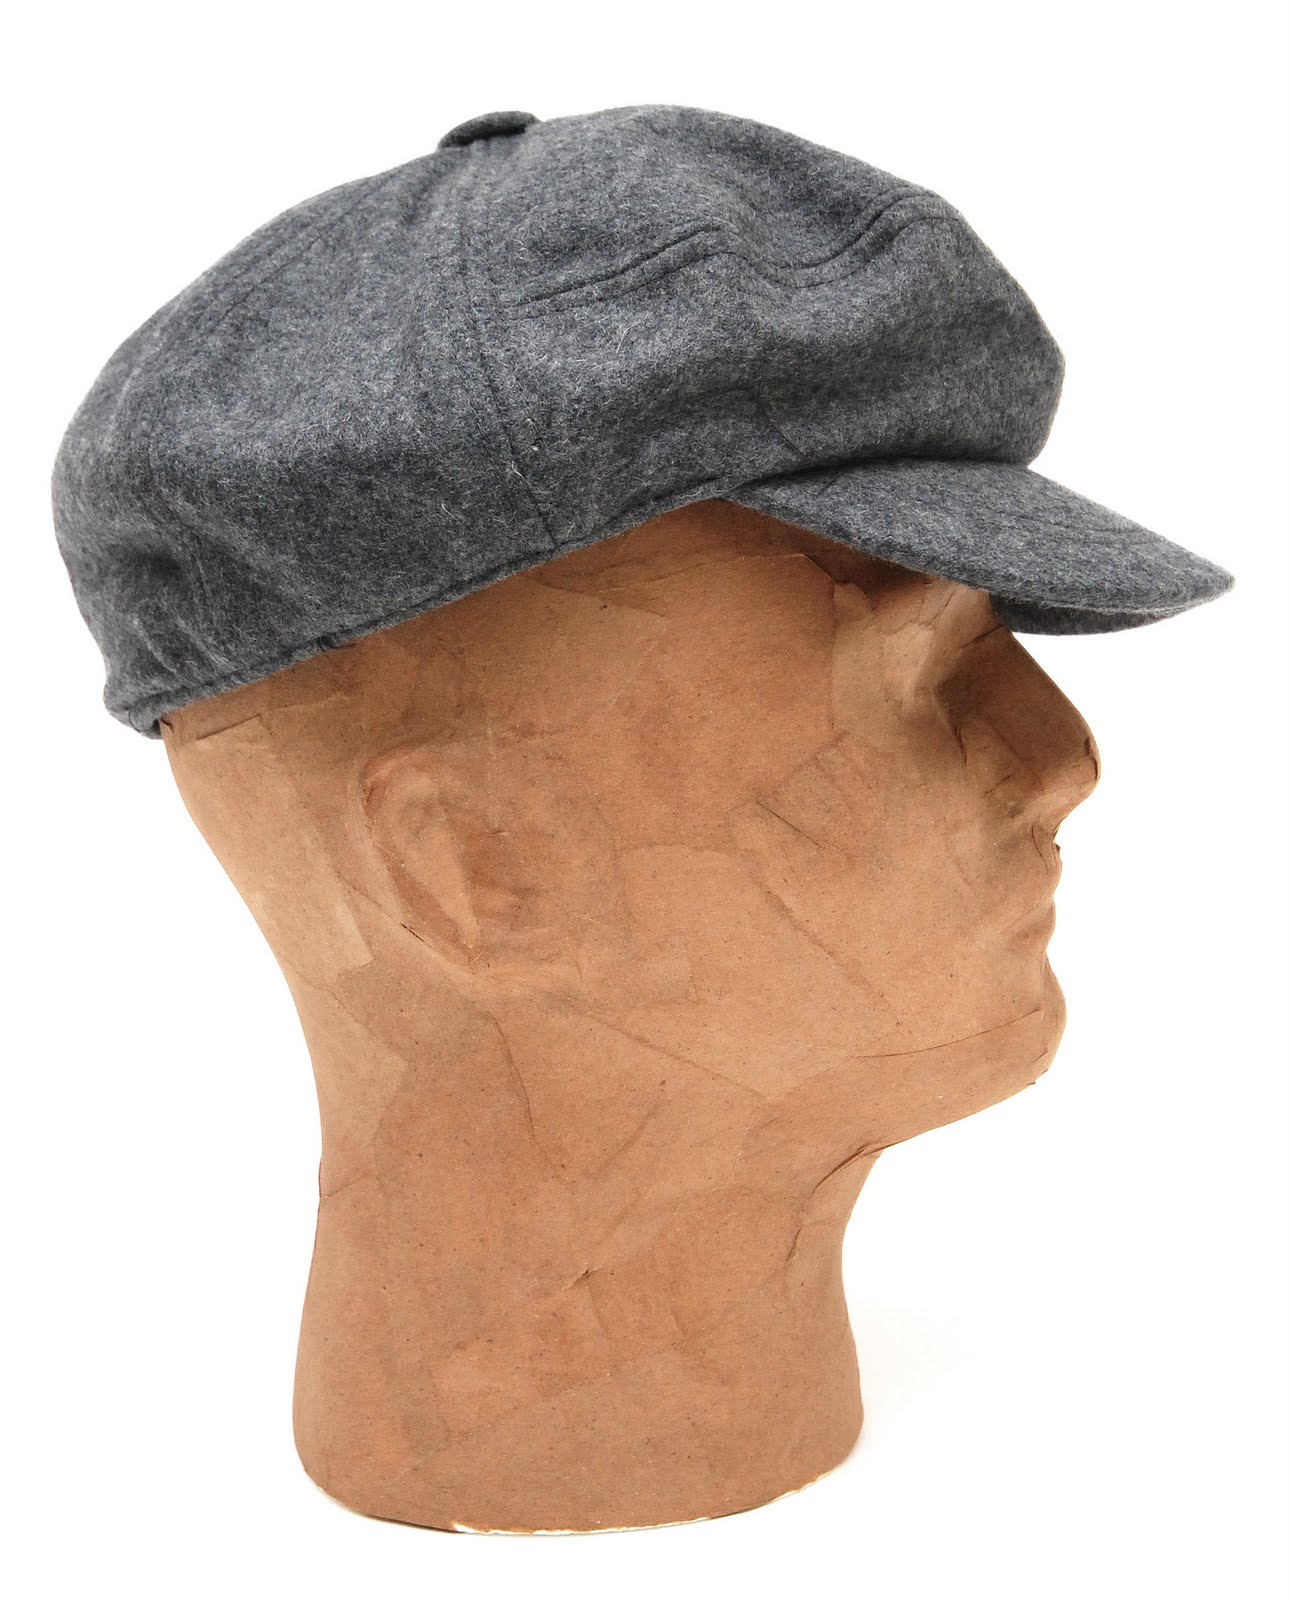 ALTER: New: Fall Hats for Men